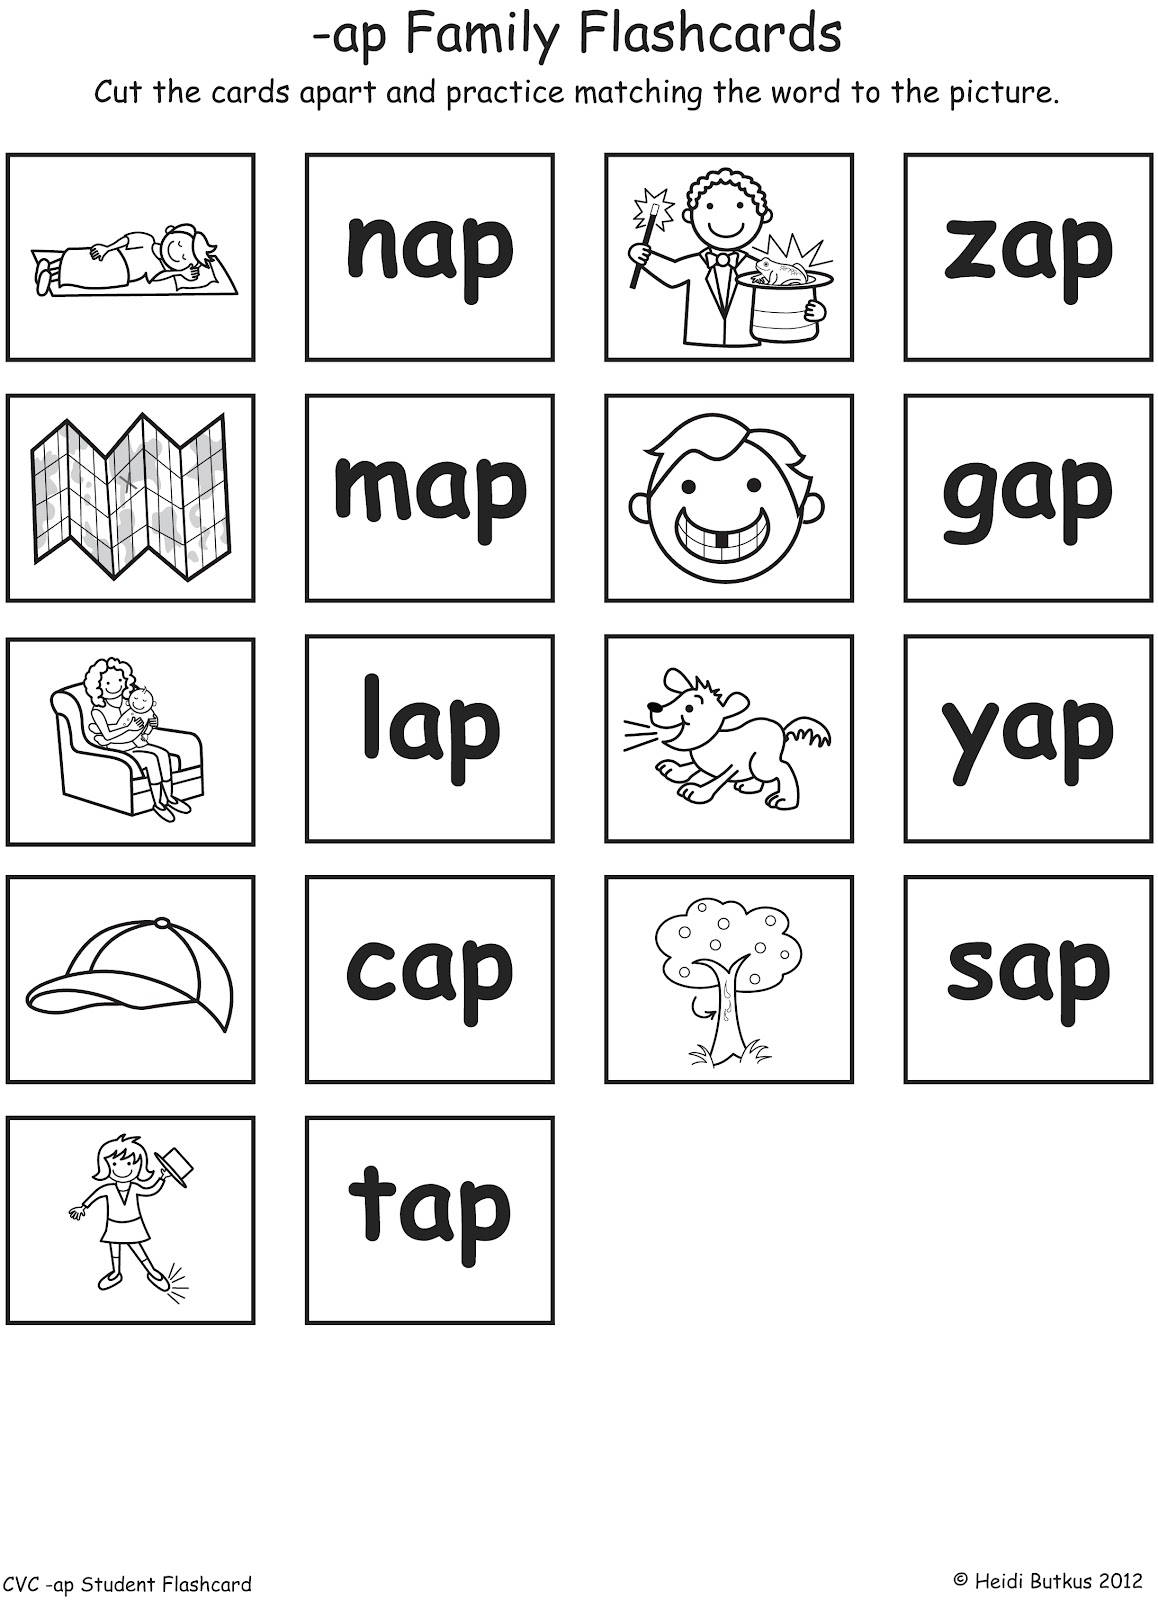 901 New cvc worksheets for kinder 763 These are the Student Flash Cards. They are about one inch square. 